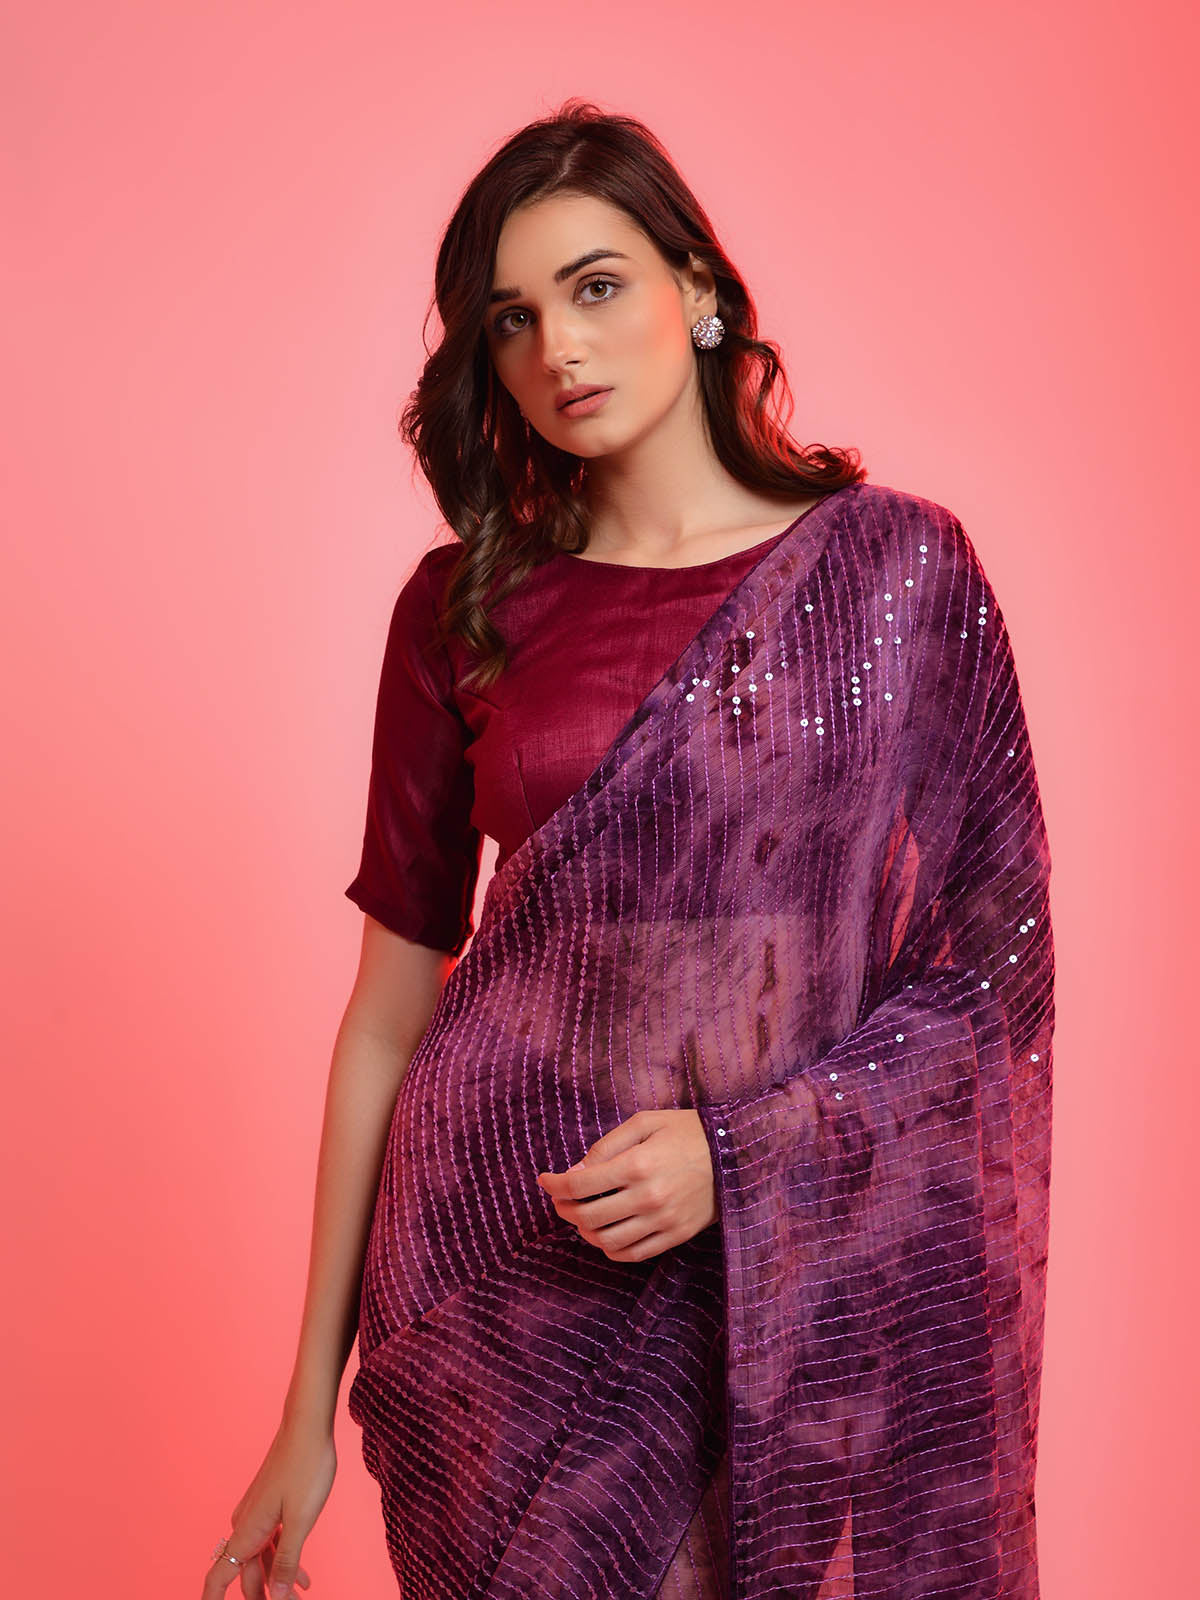 Women's Violet Chiffon Sequince Embroidered Saree - Odette